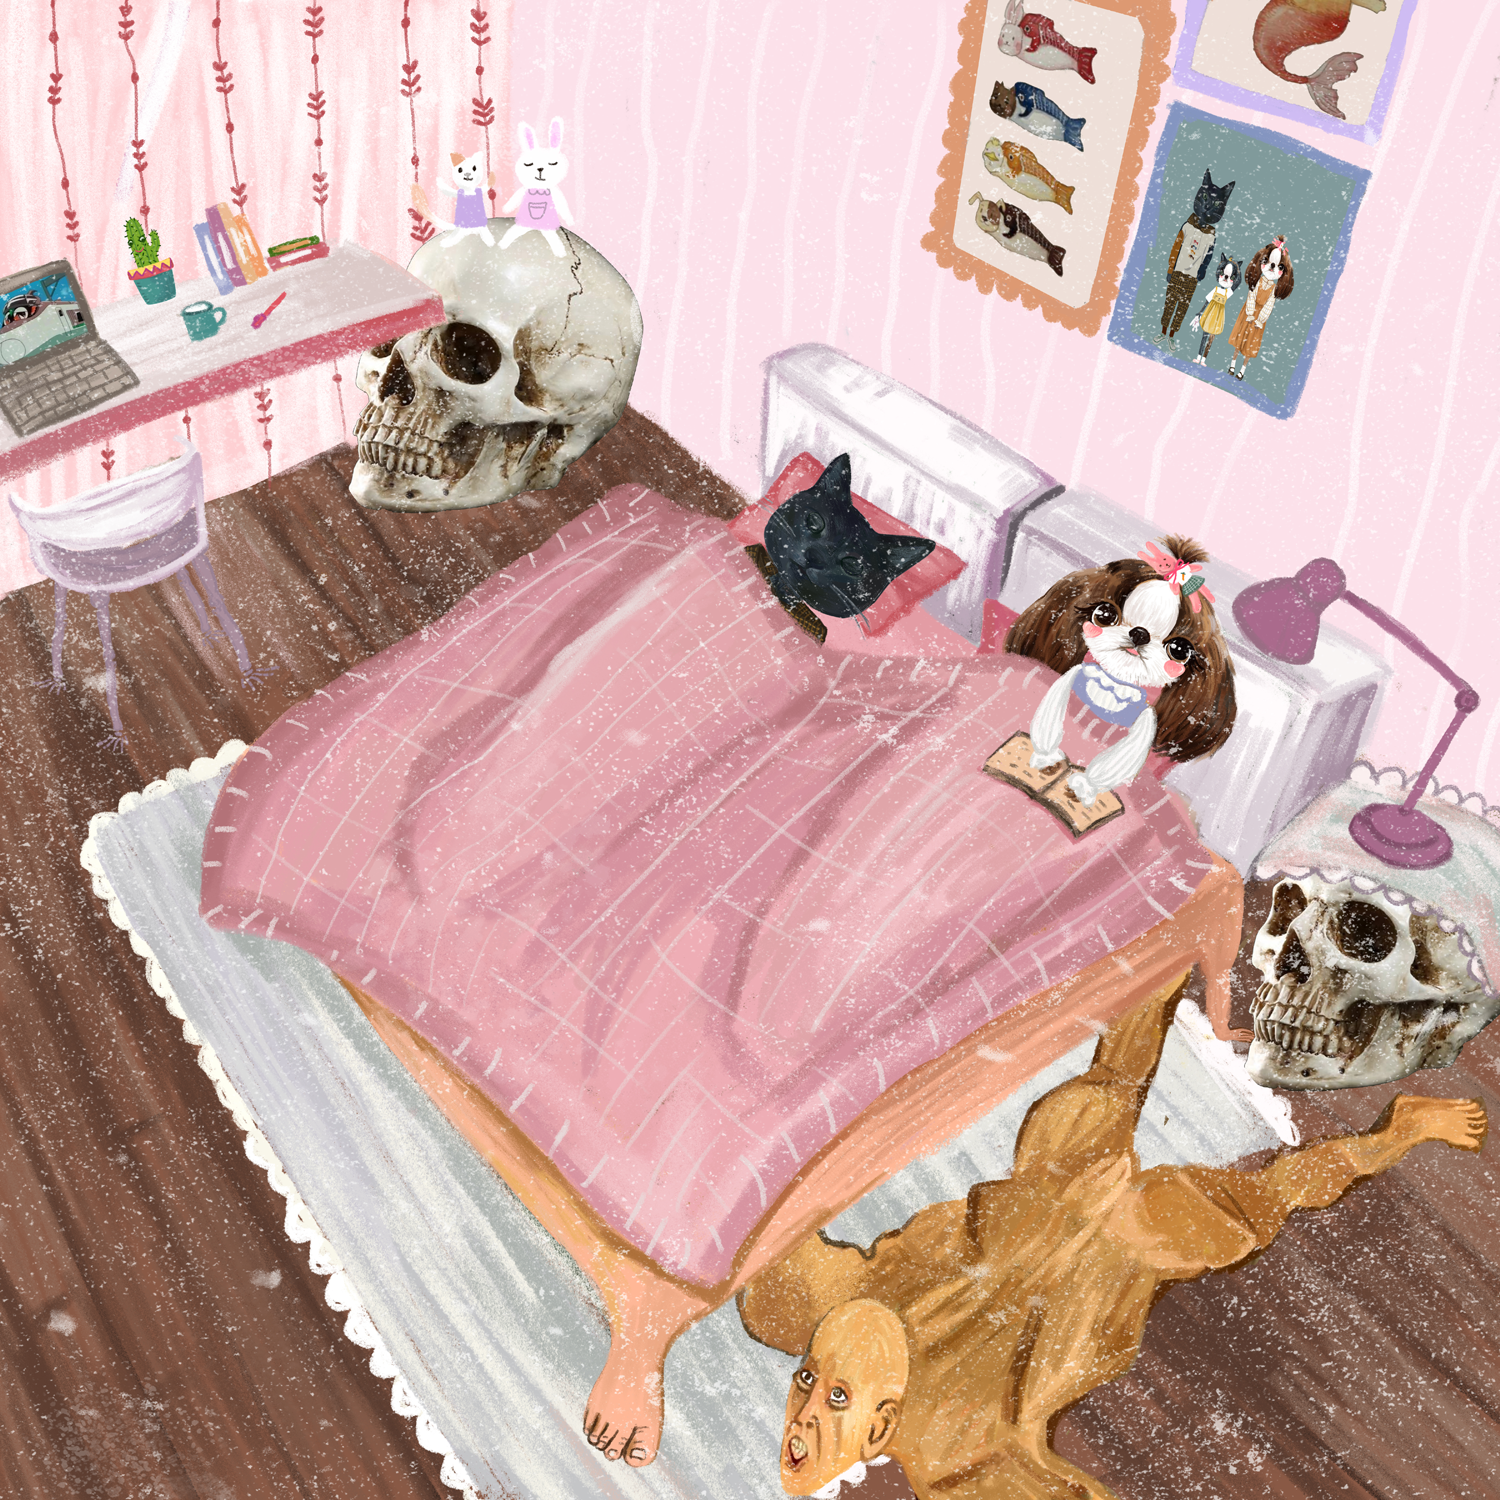 Louis is sleeping and Chanel is reading a book. In this bedroom, all the furniture is made by humans.